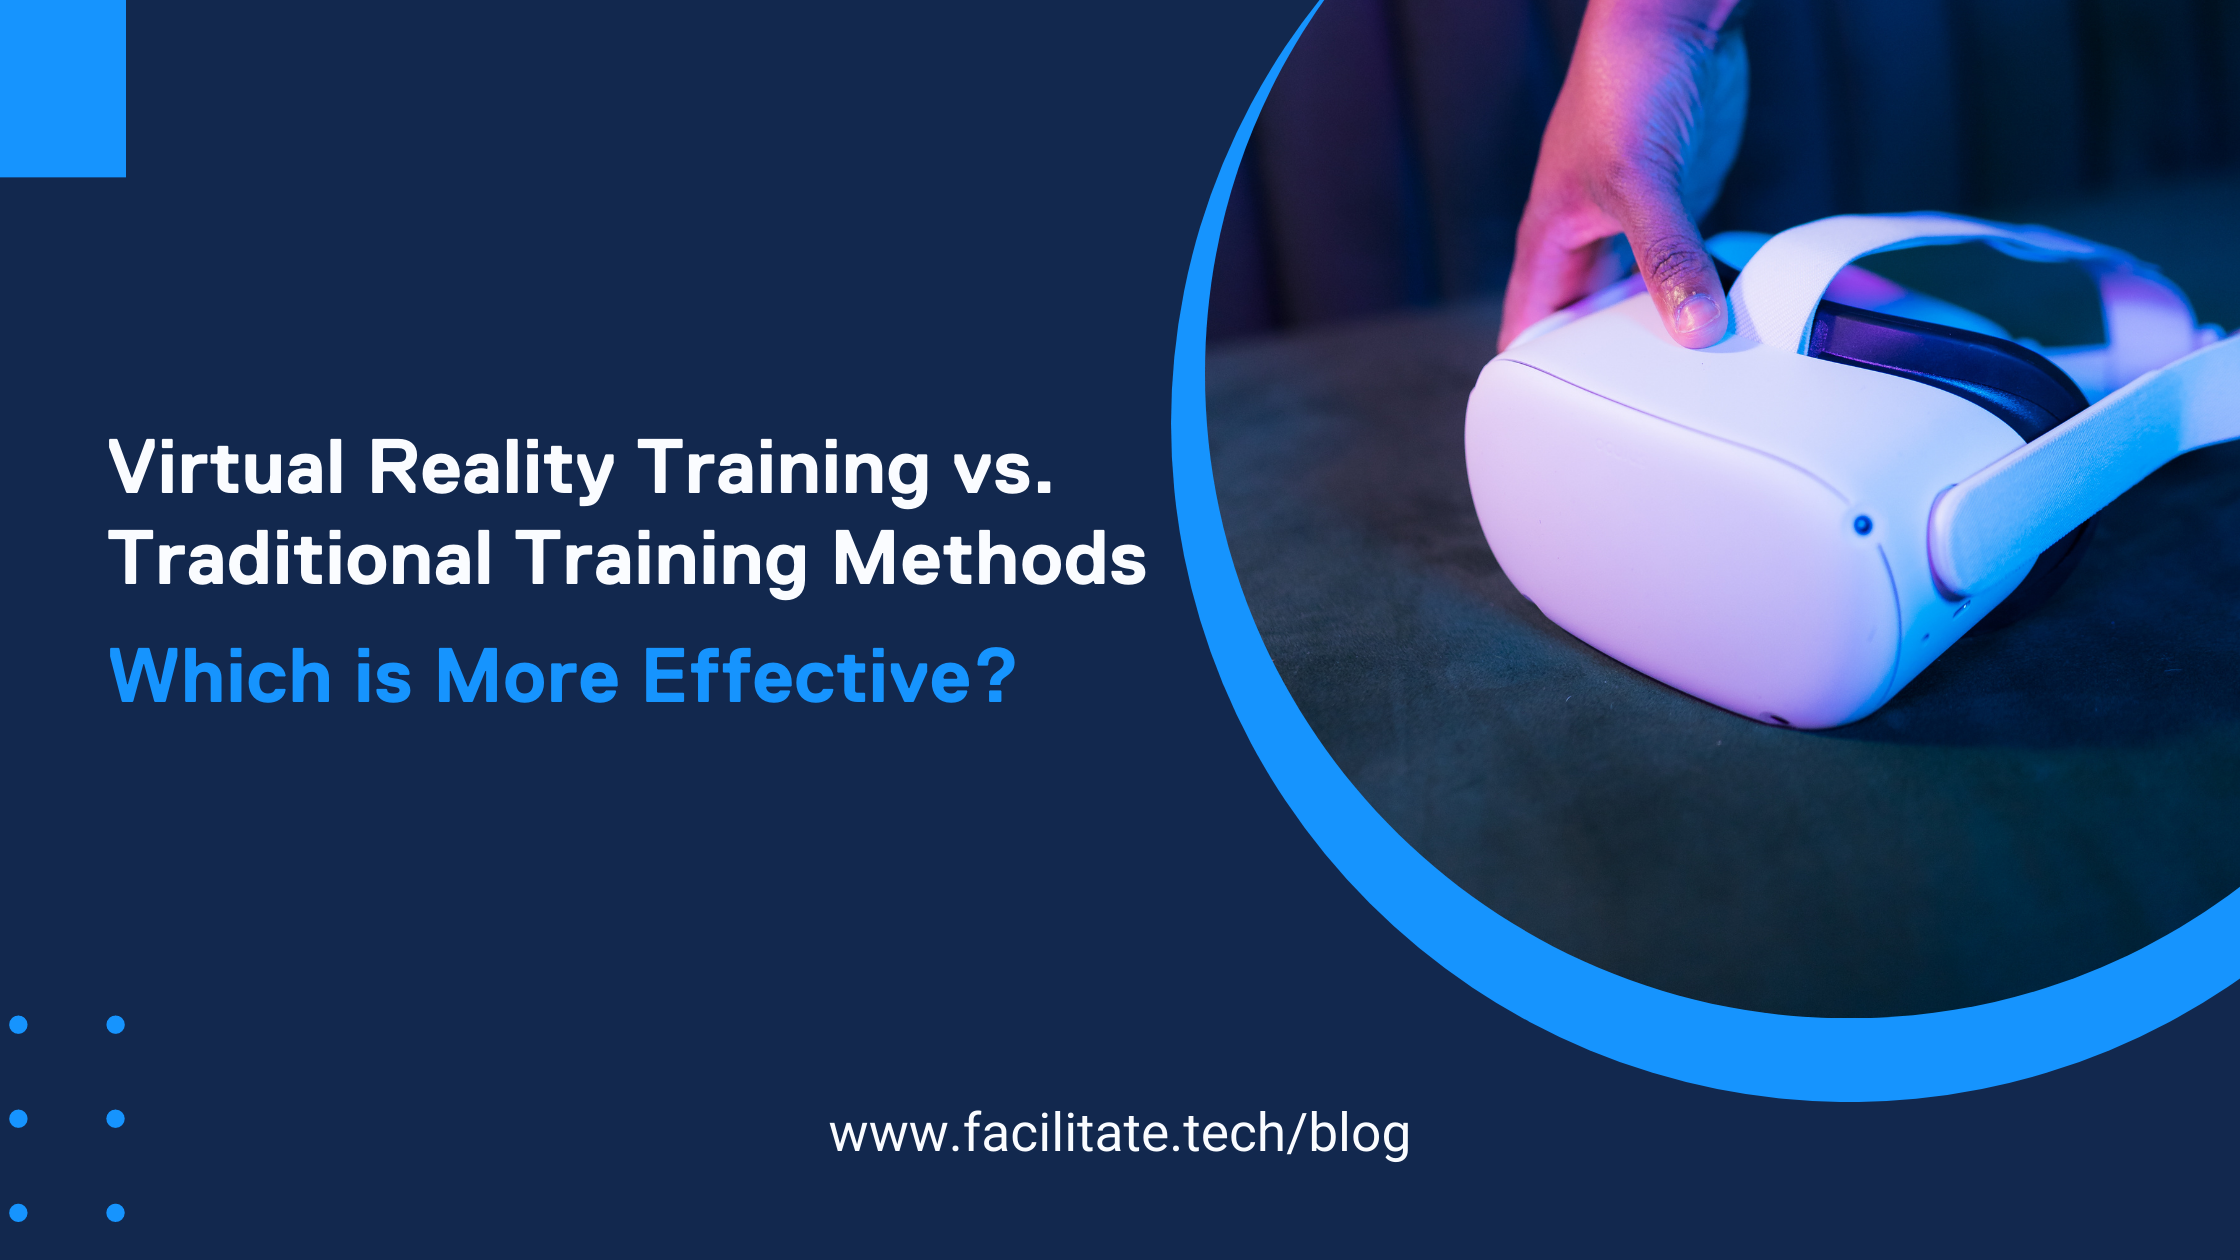 Virtual Reality Training vs Traditional Training Methods: Which is More Effective?